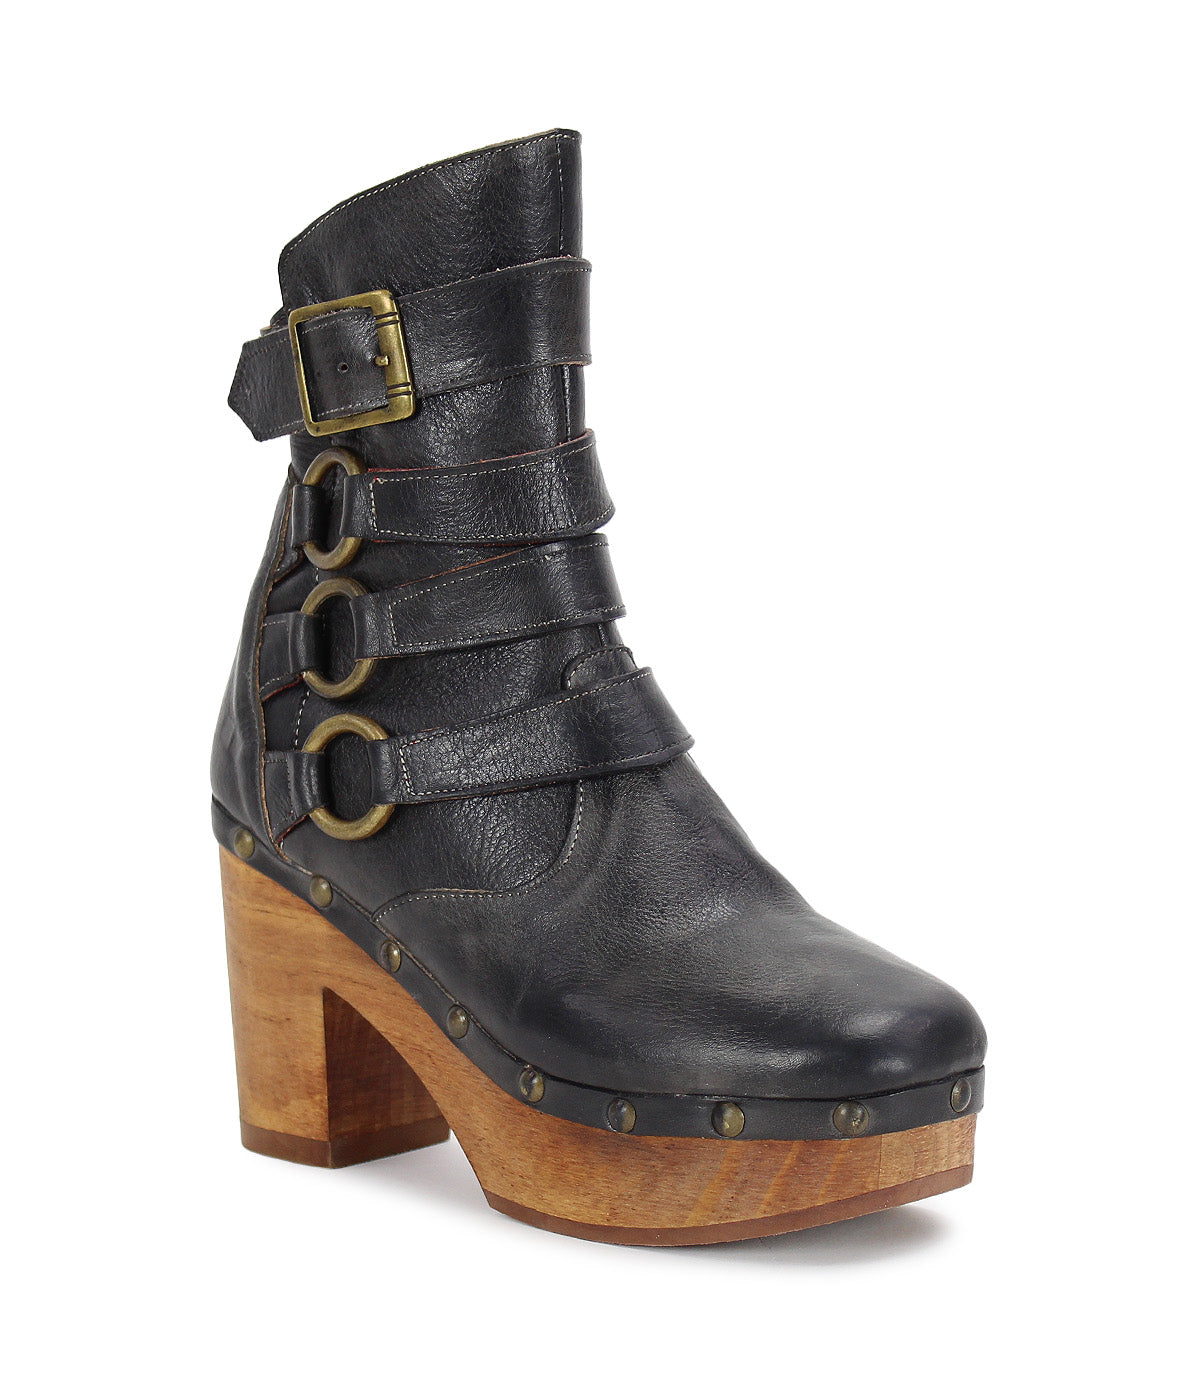 A women's Moira leather boot with wooden heels and metal accents by Bed Stu.